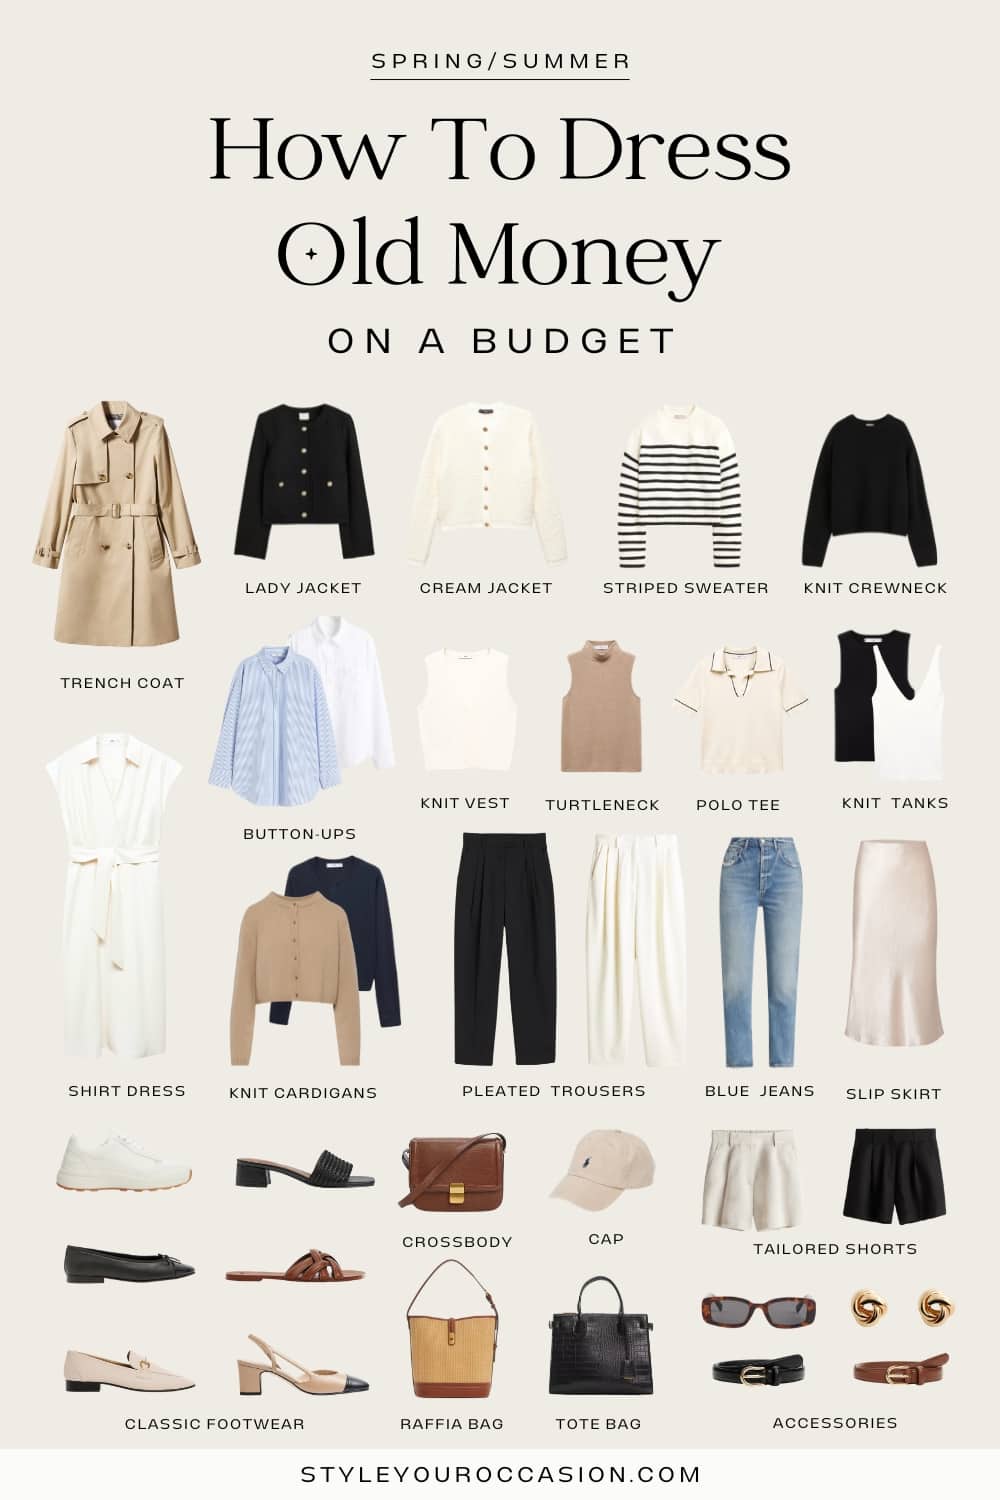 capsule wardrobe collage graphic with old money pieces that are budget friendly, including neutral tops, trousers, and accessories